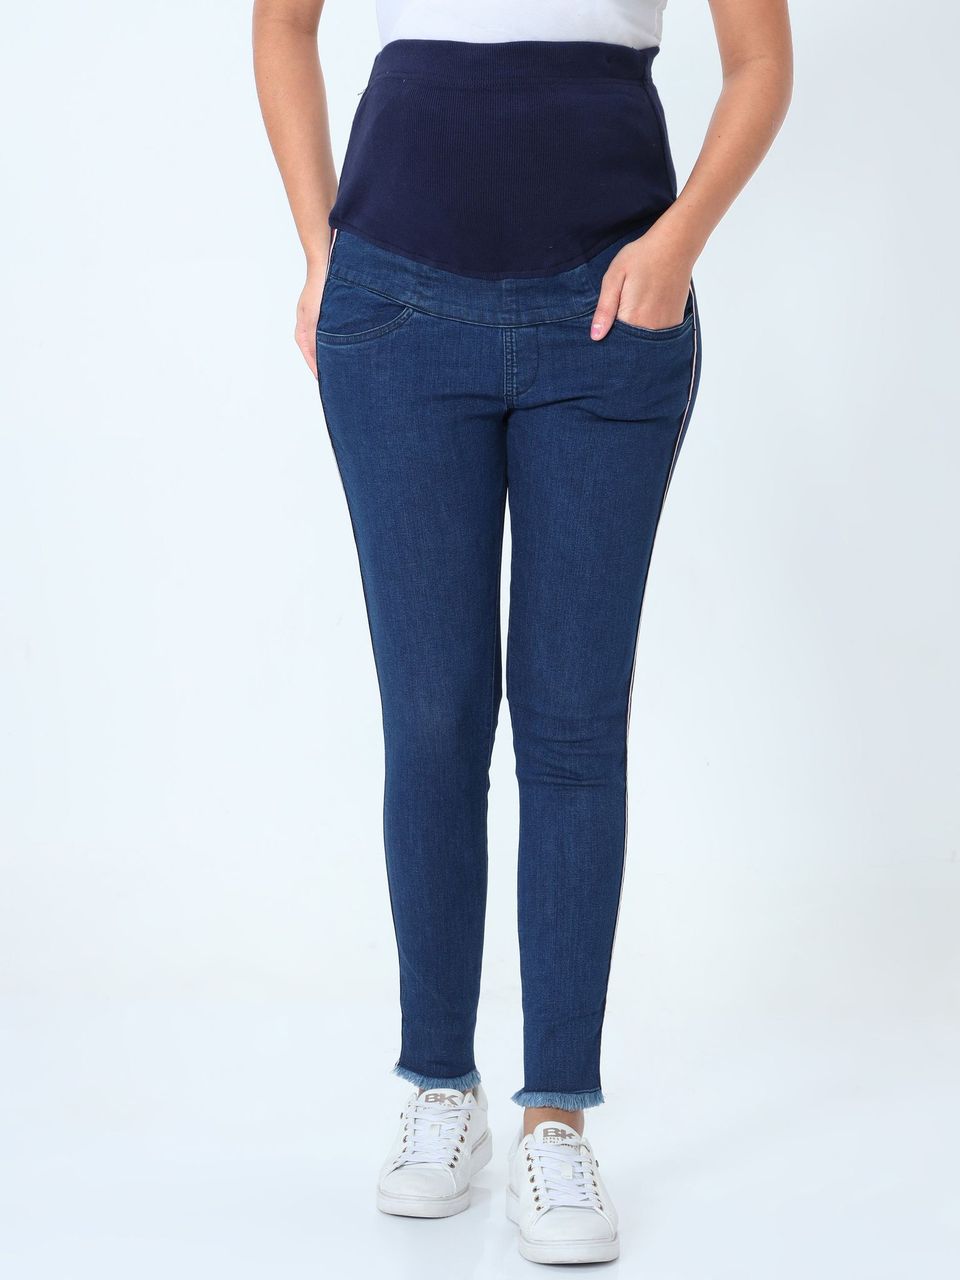 The Mom Store Distress Taped Maternity Denims with Belly Support-Blue